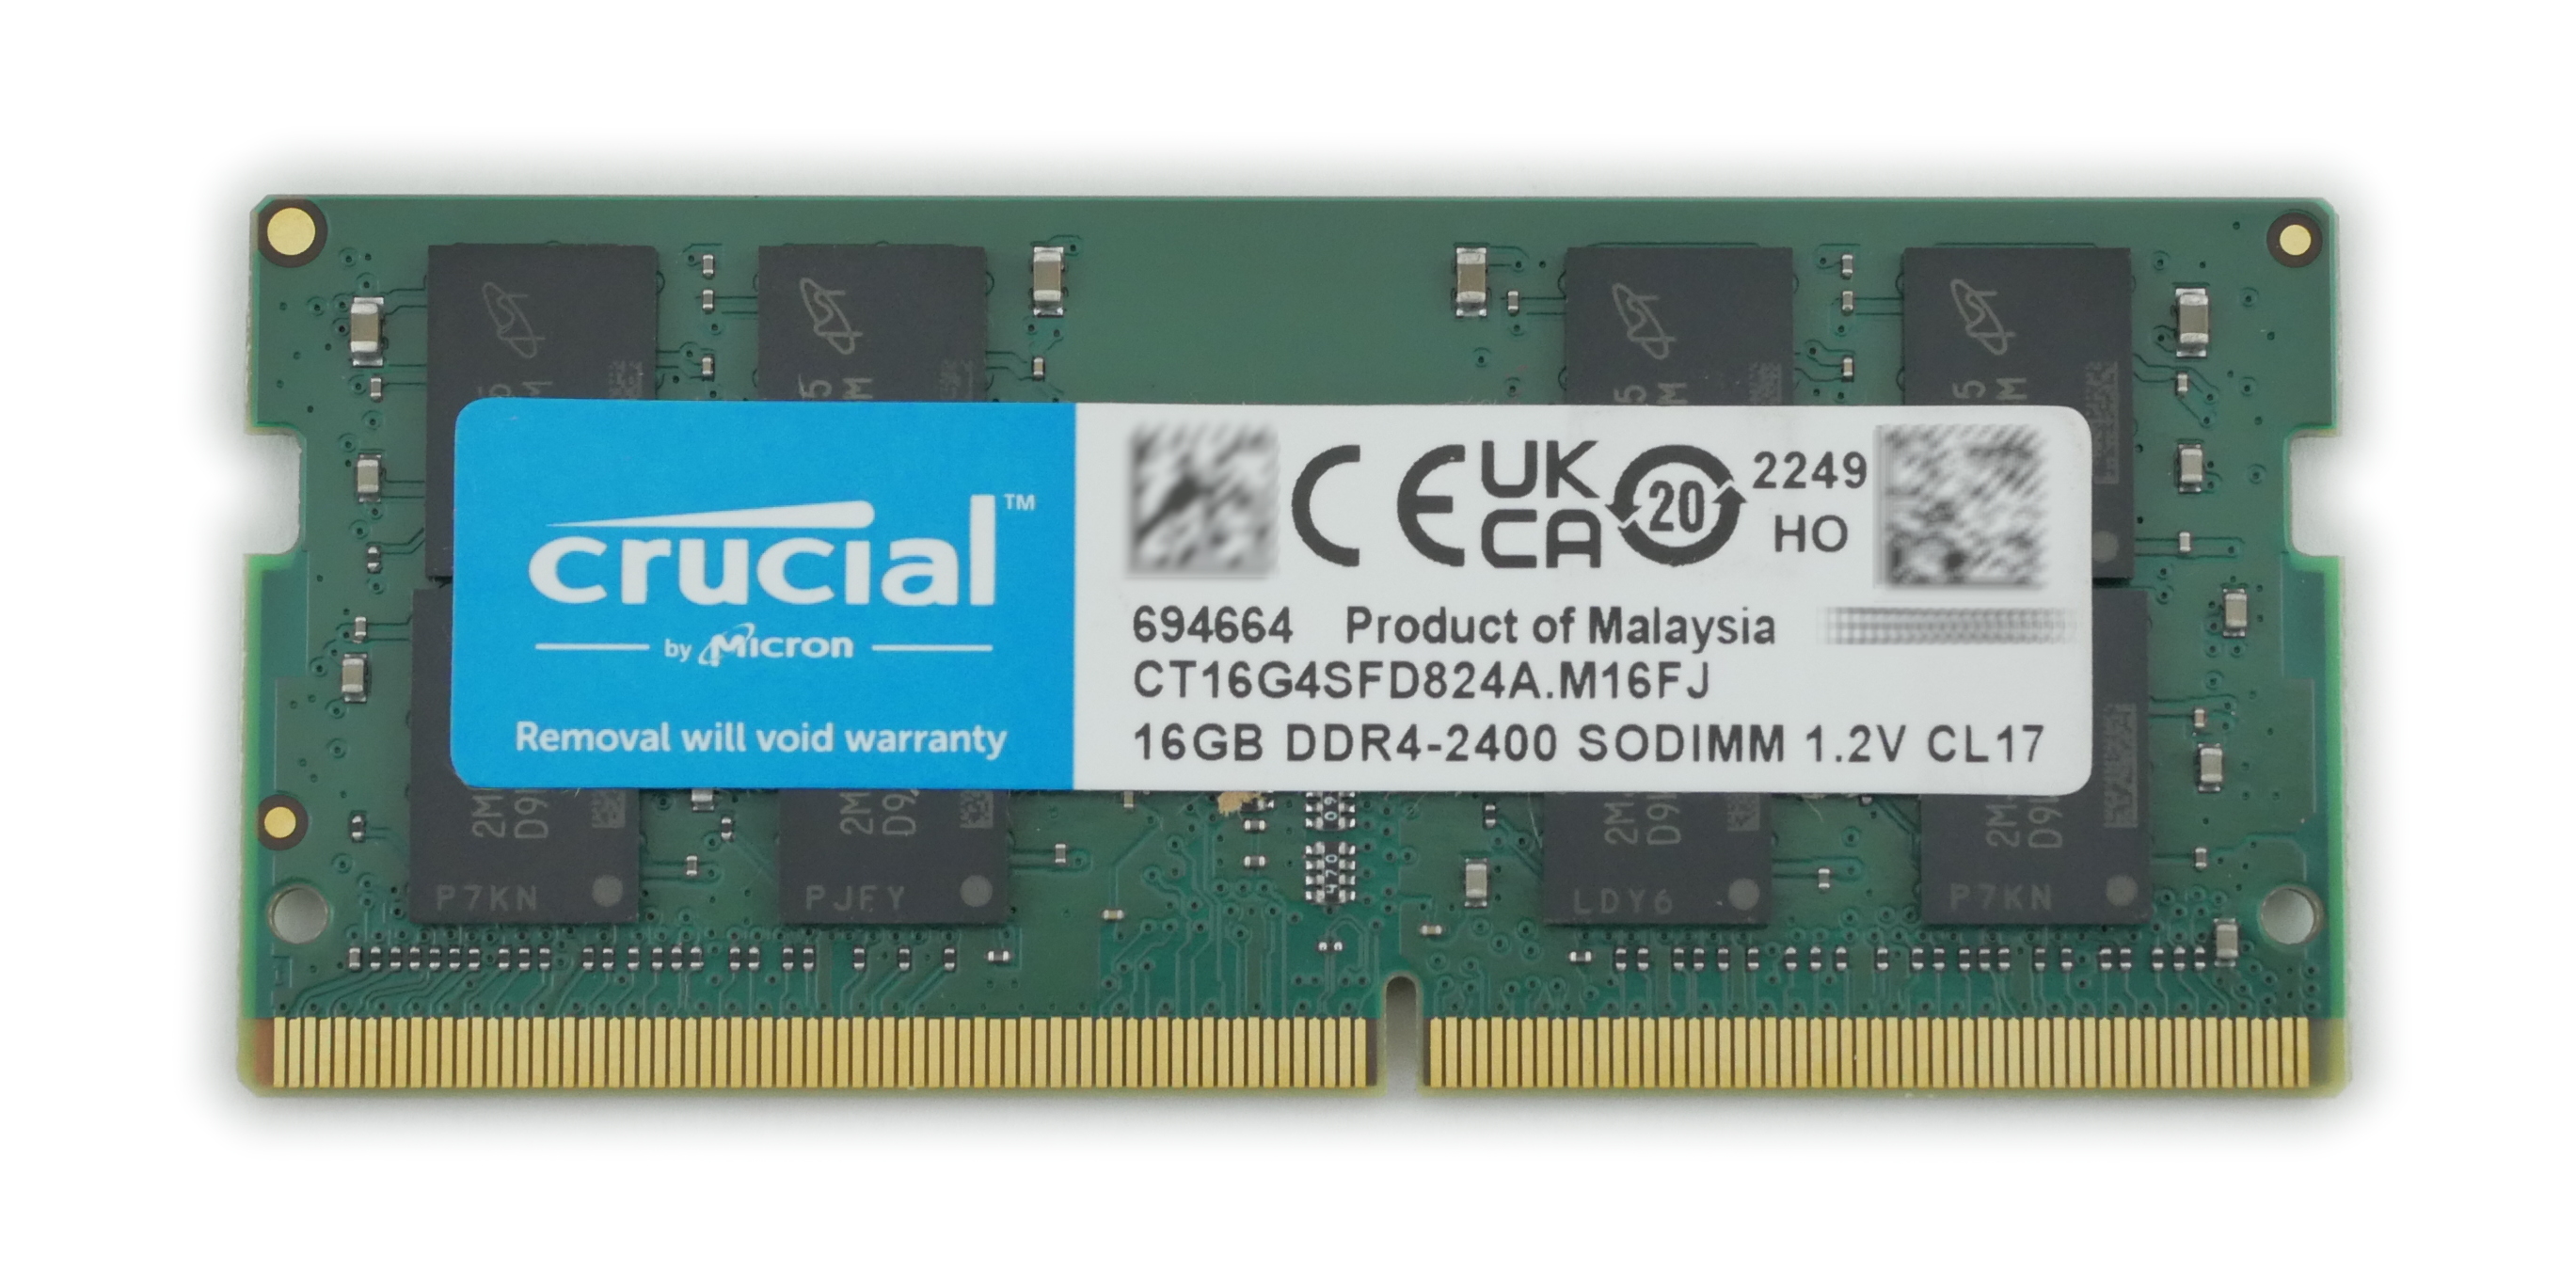 Crucial 16GB CT16G4SFD824A DDR4-2400 PC4-19200 SODIMM 1.2V - Click Image to Close